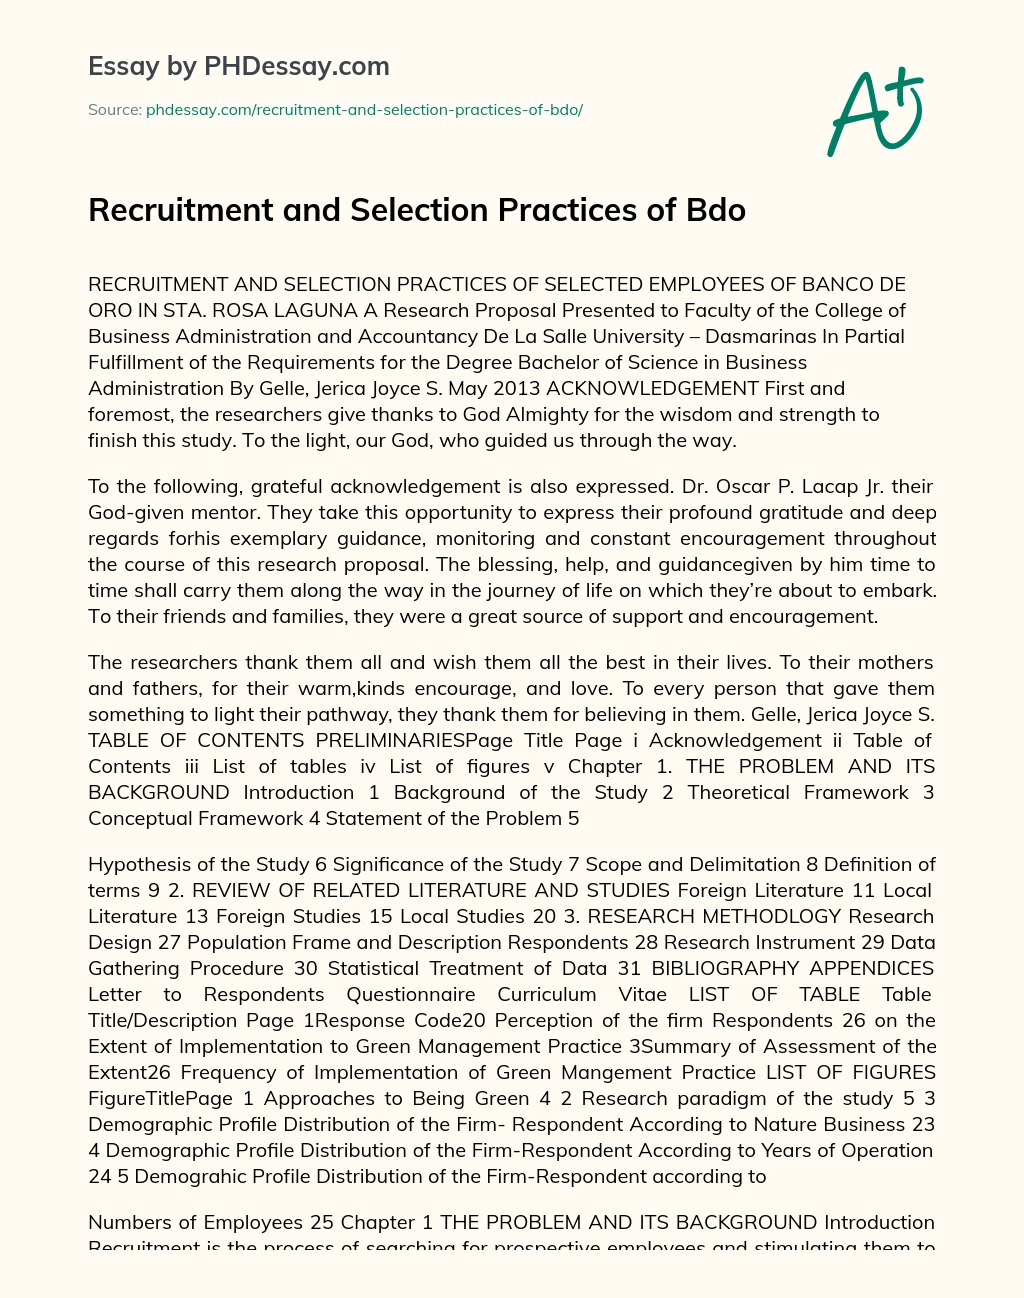 Recruitment and Selection Practices of Bdo essay